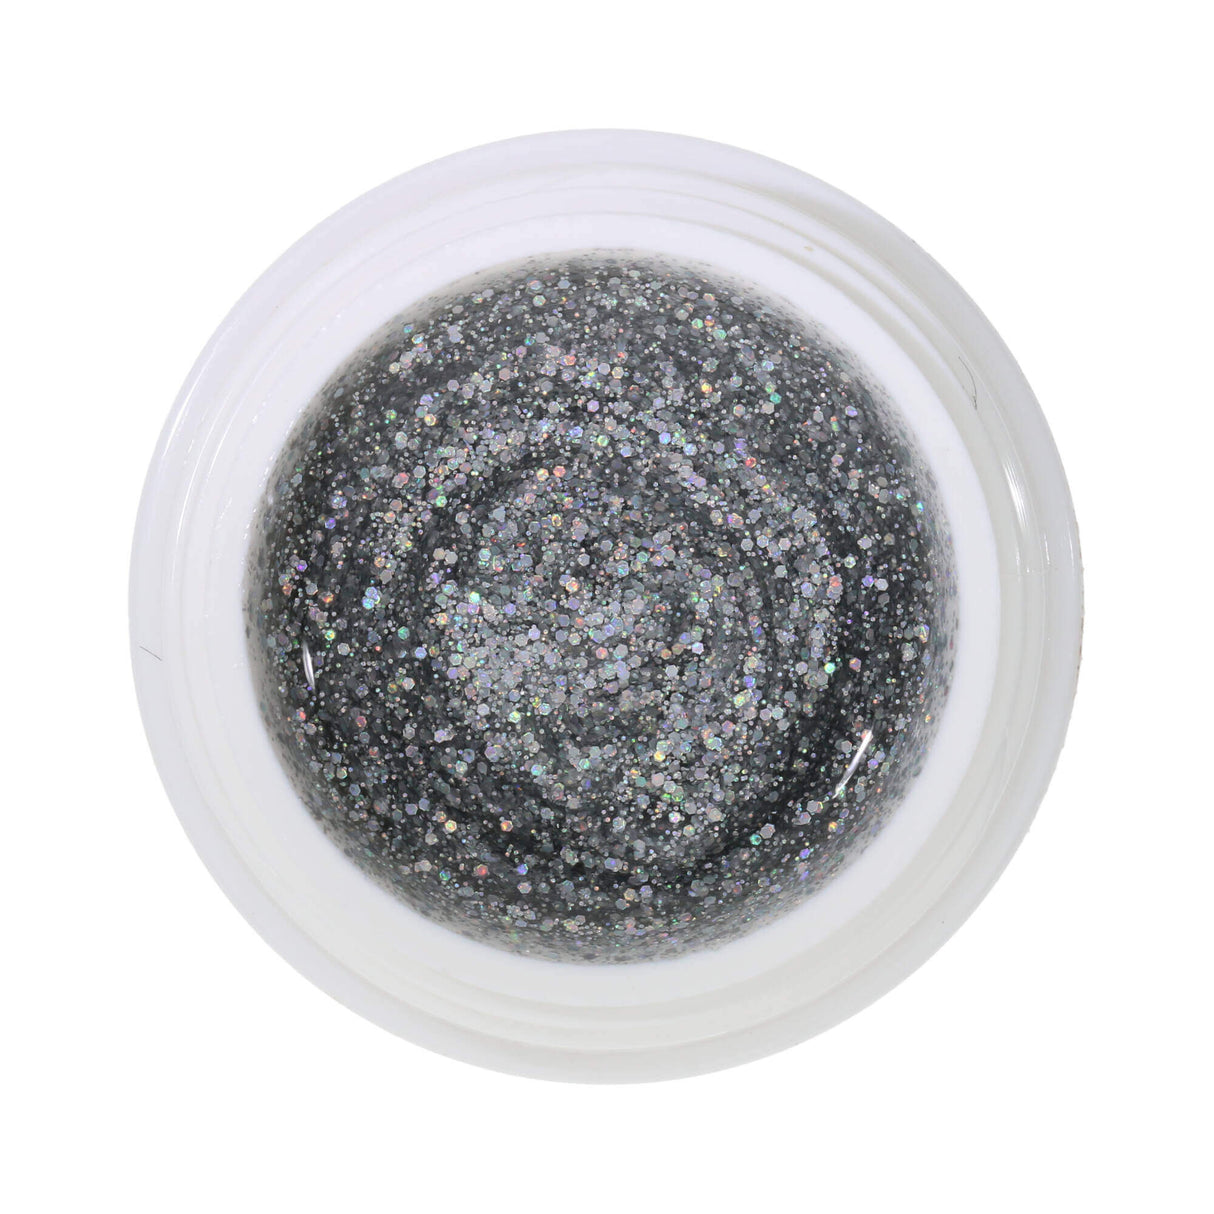 # 225 Premium-GLITTER Color Gel 5ml silver glitter with a very nice rainbow effect